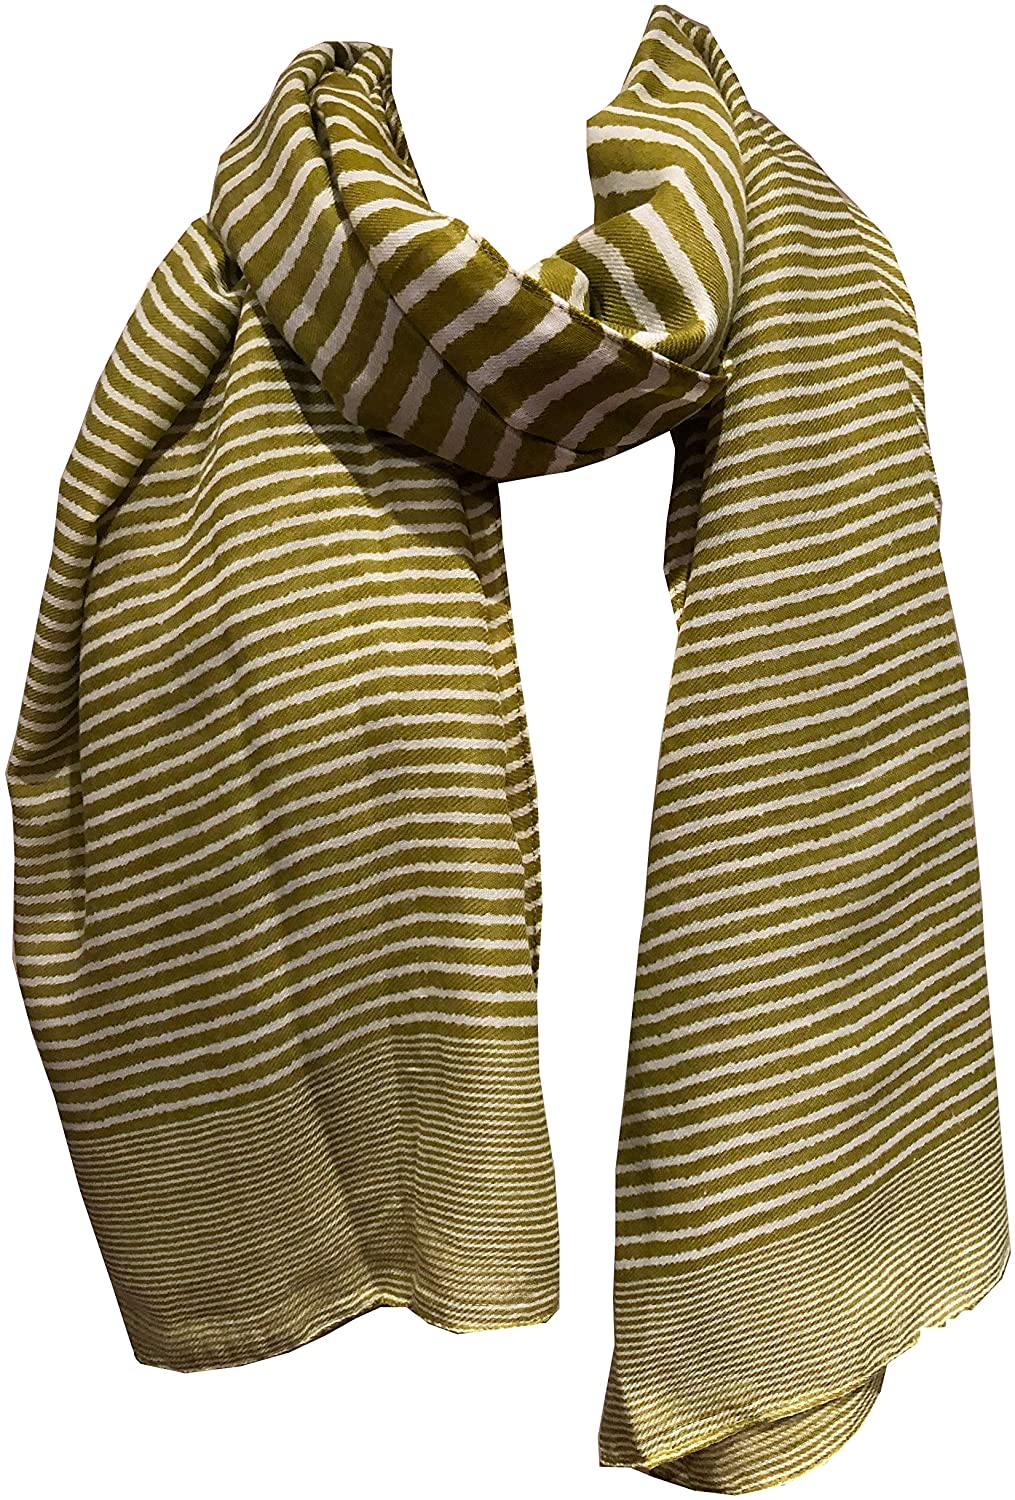 Mustard with white stripes ladies or men's long soft scarf